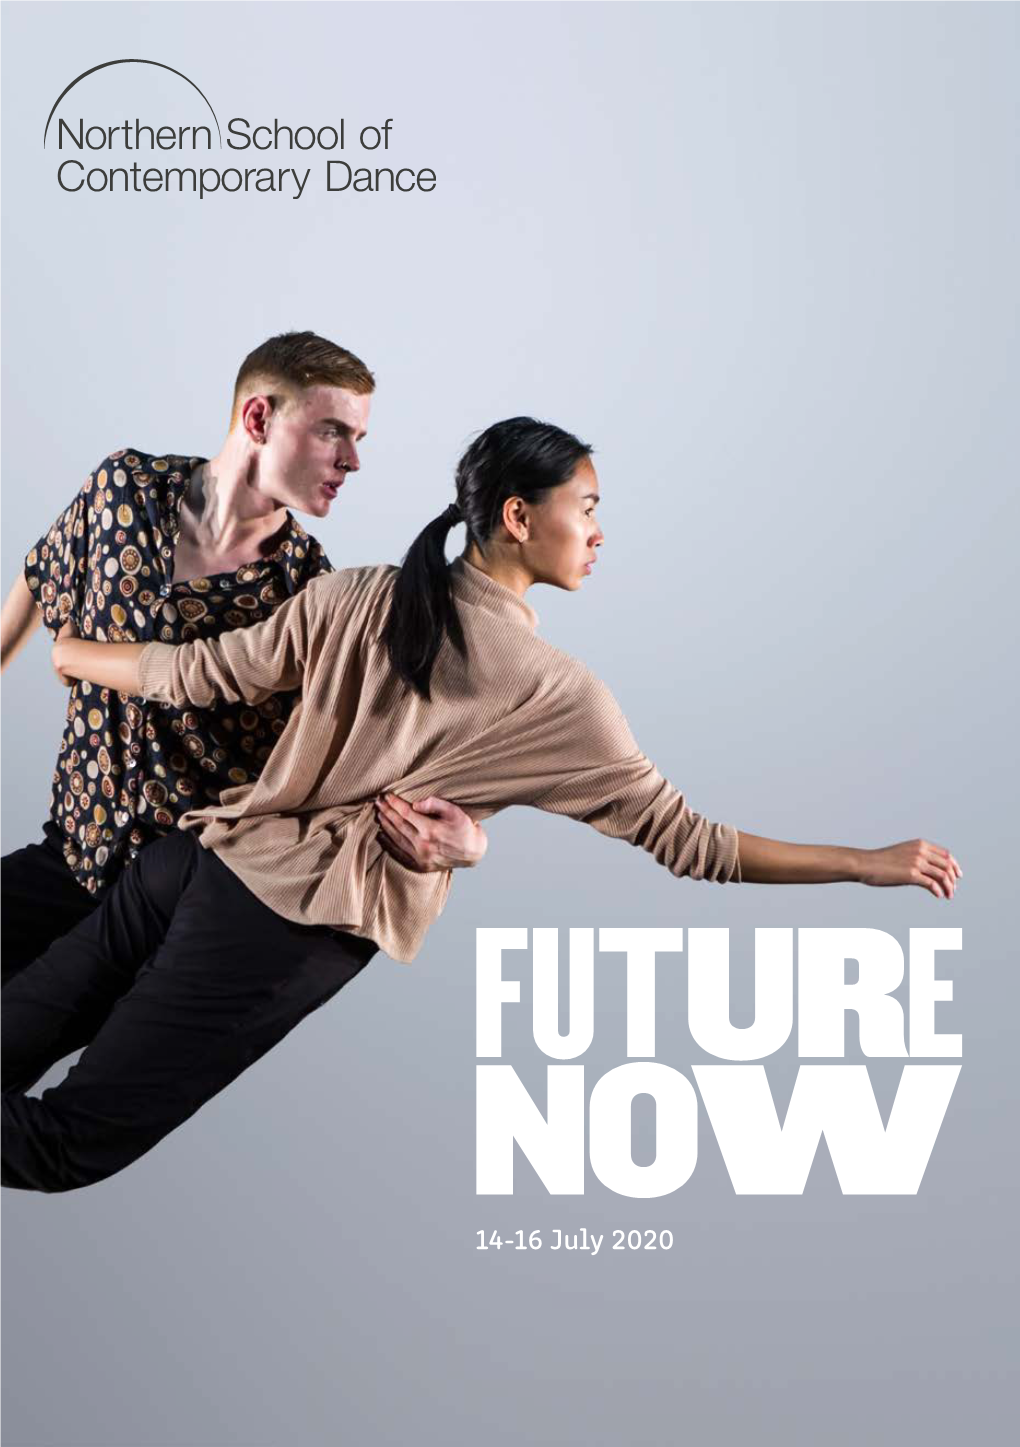 14-16 July 2020 FUTURE NOW MARKS the CULMINATION of OUR BA DANCE STUDENTS’ THREE-YEAR PREPARATION for ENTERING the PROFESSION AS CONTEMPORARY DANCE ARTISTS